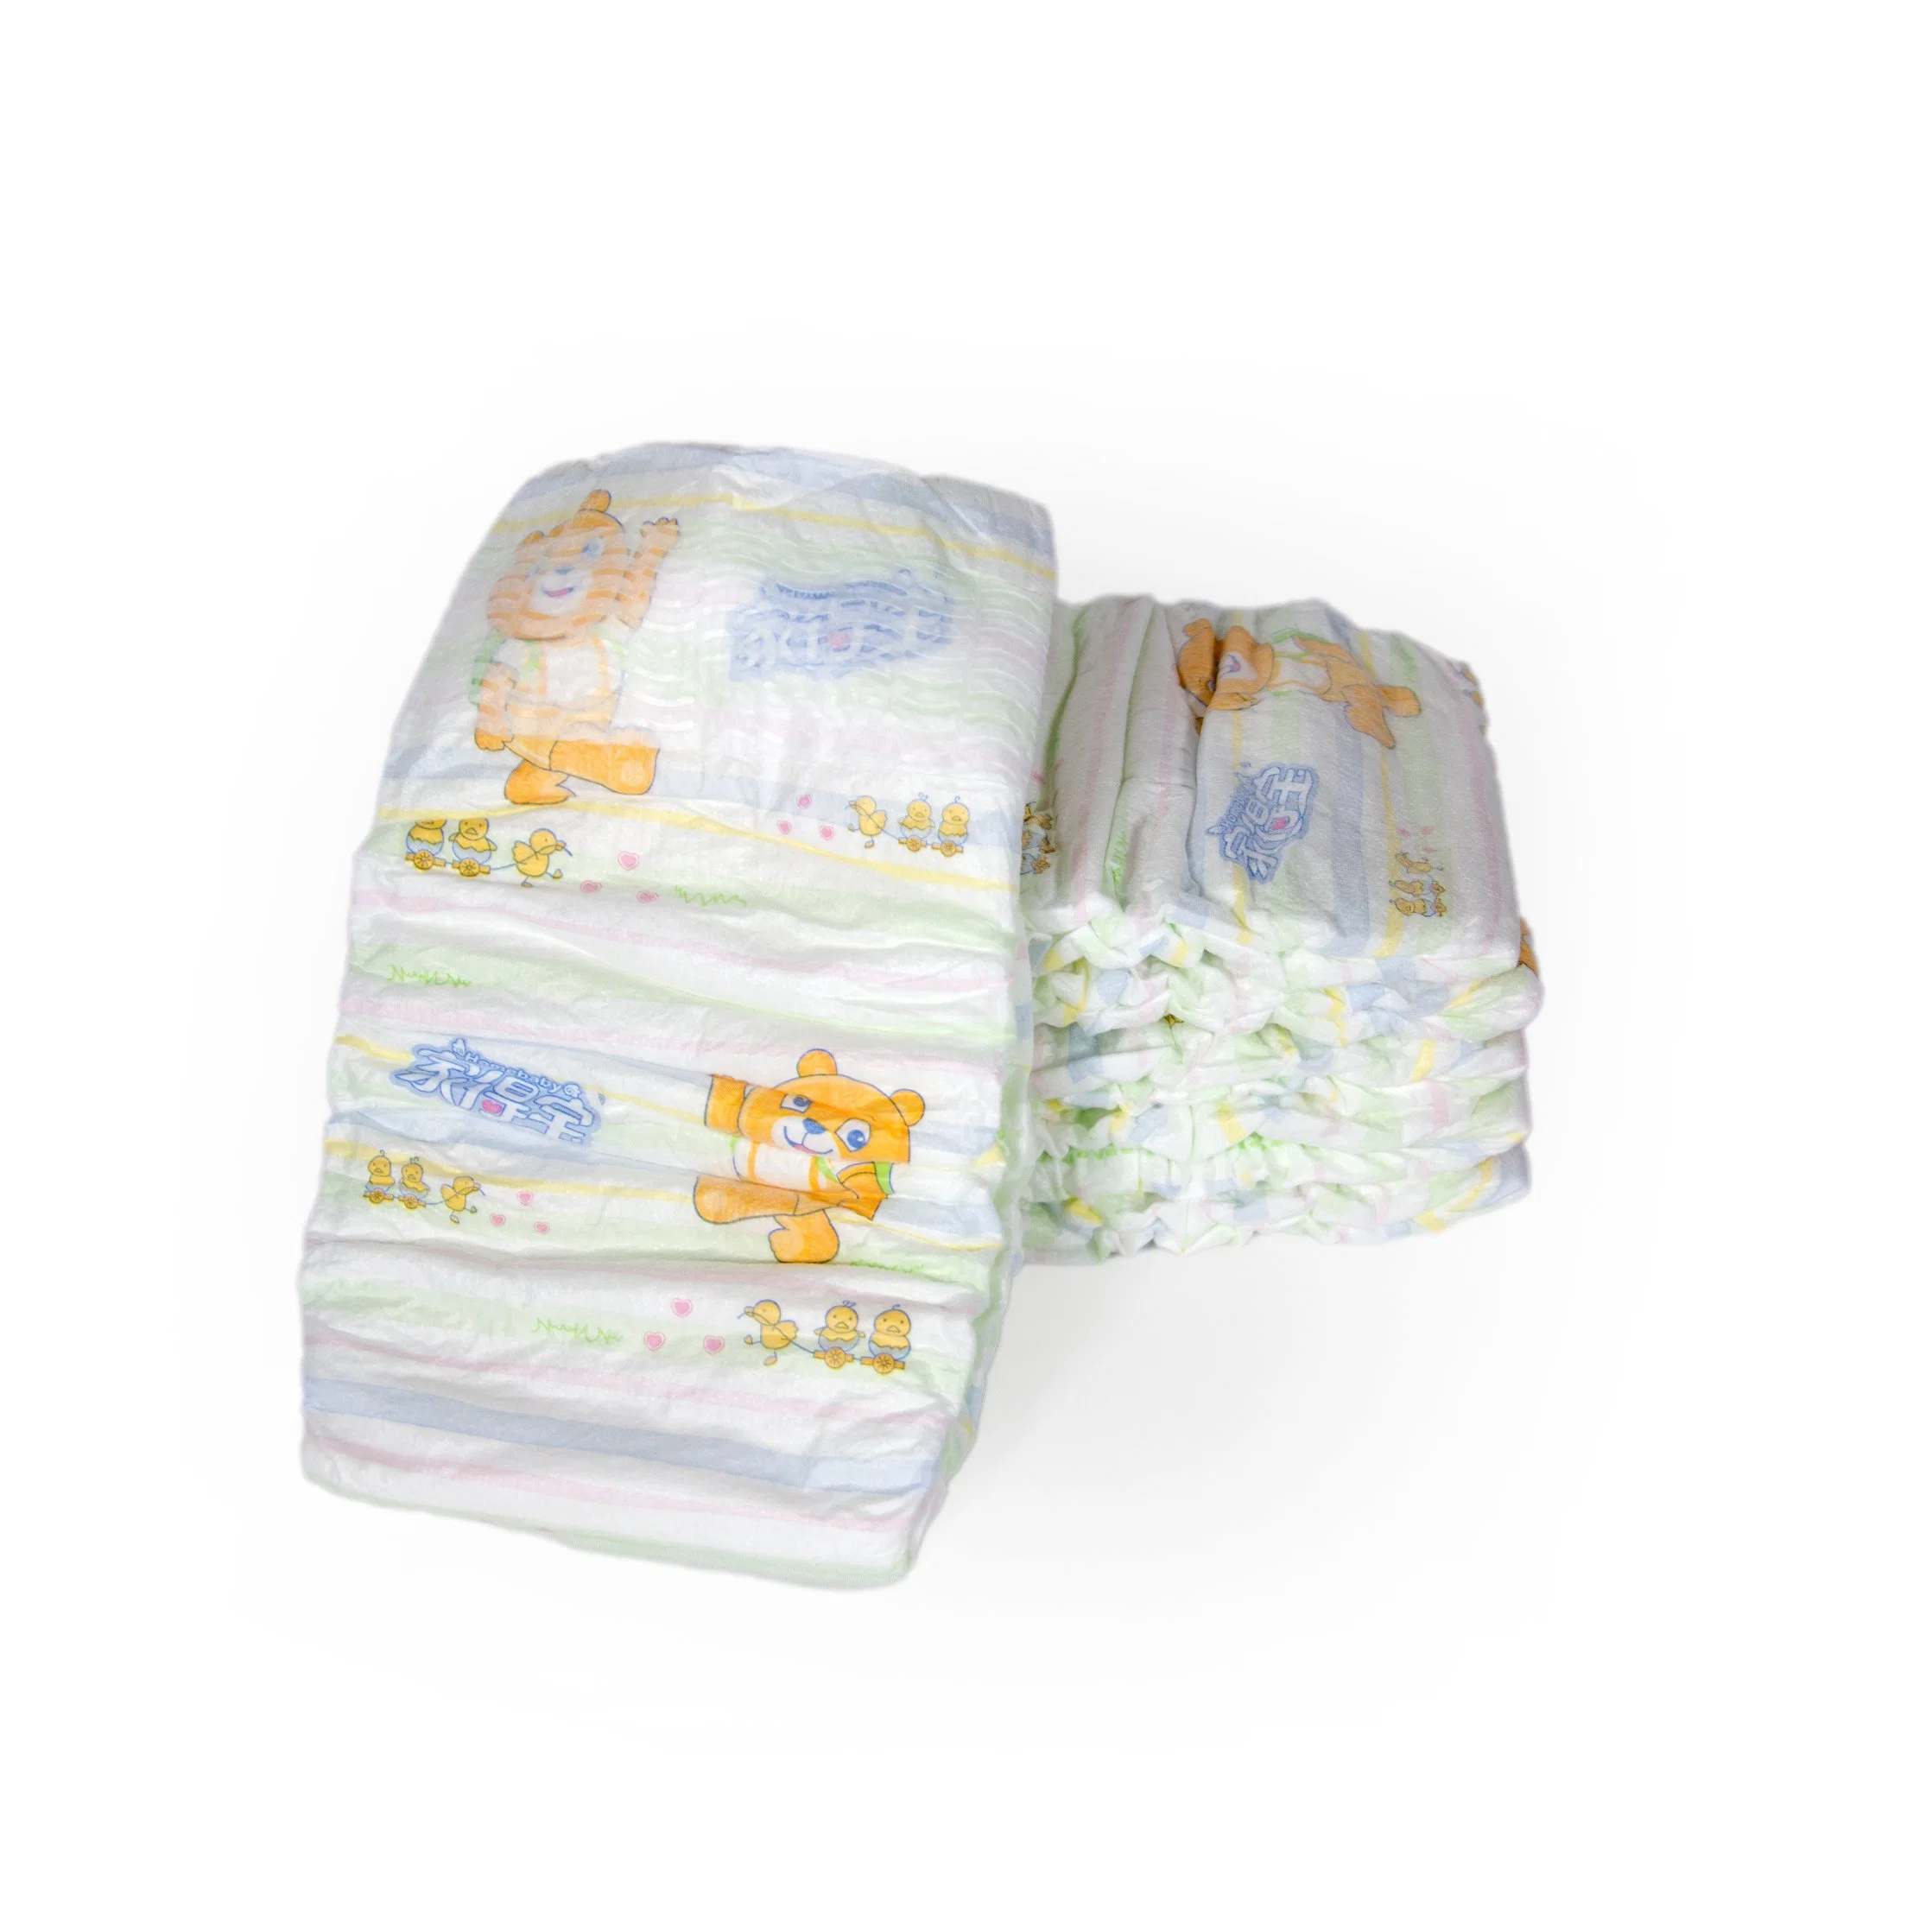 Adult Diapers/Baby Diapers/Health Care/Low Price/Disposable/Overnight Absorbency/Elder Diapers